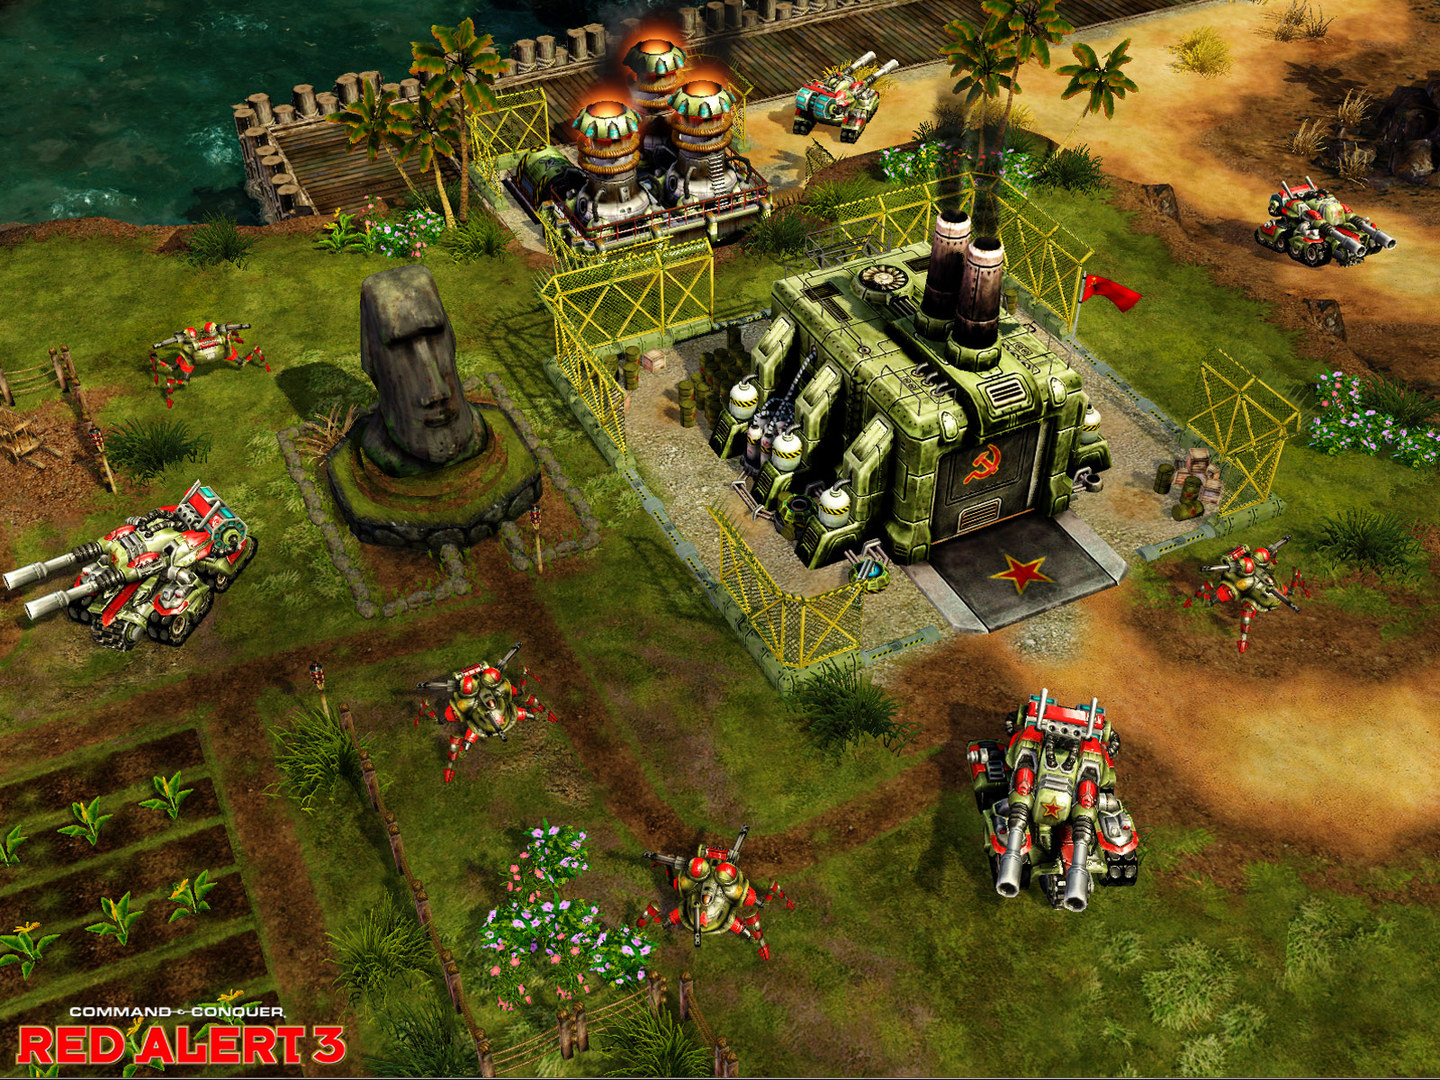 Command and Conquer Red Alert 3 Nintendo Switch Full Version Free Download